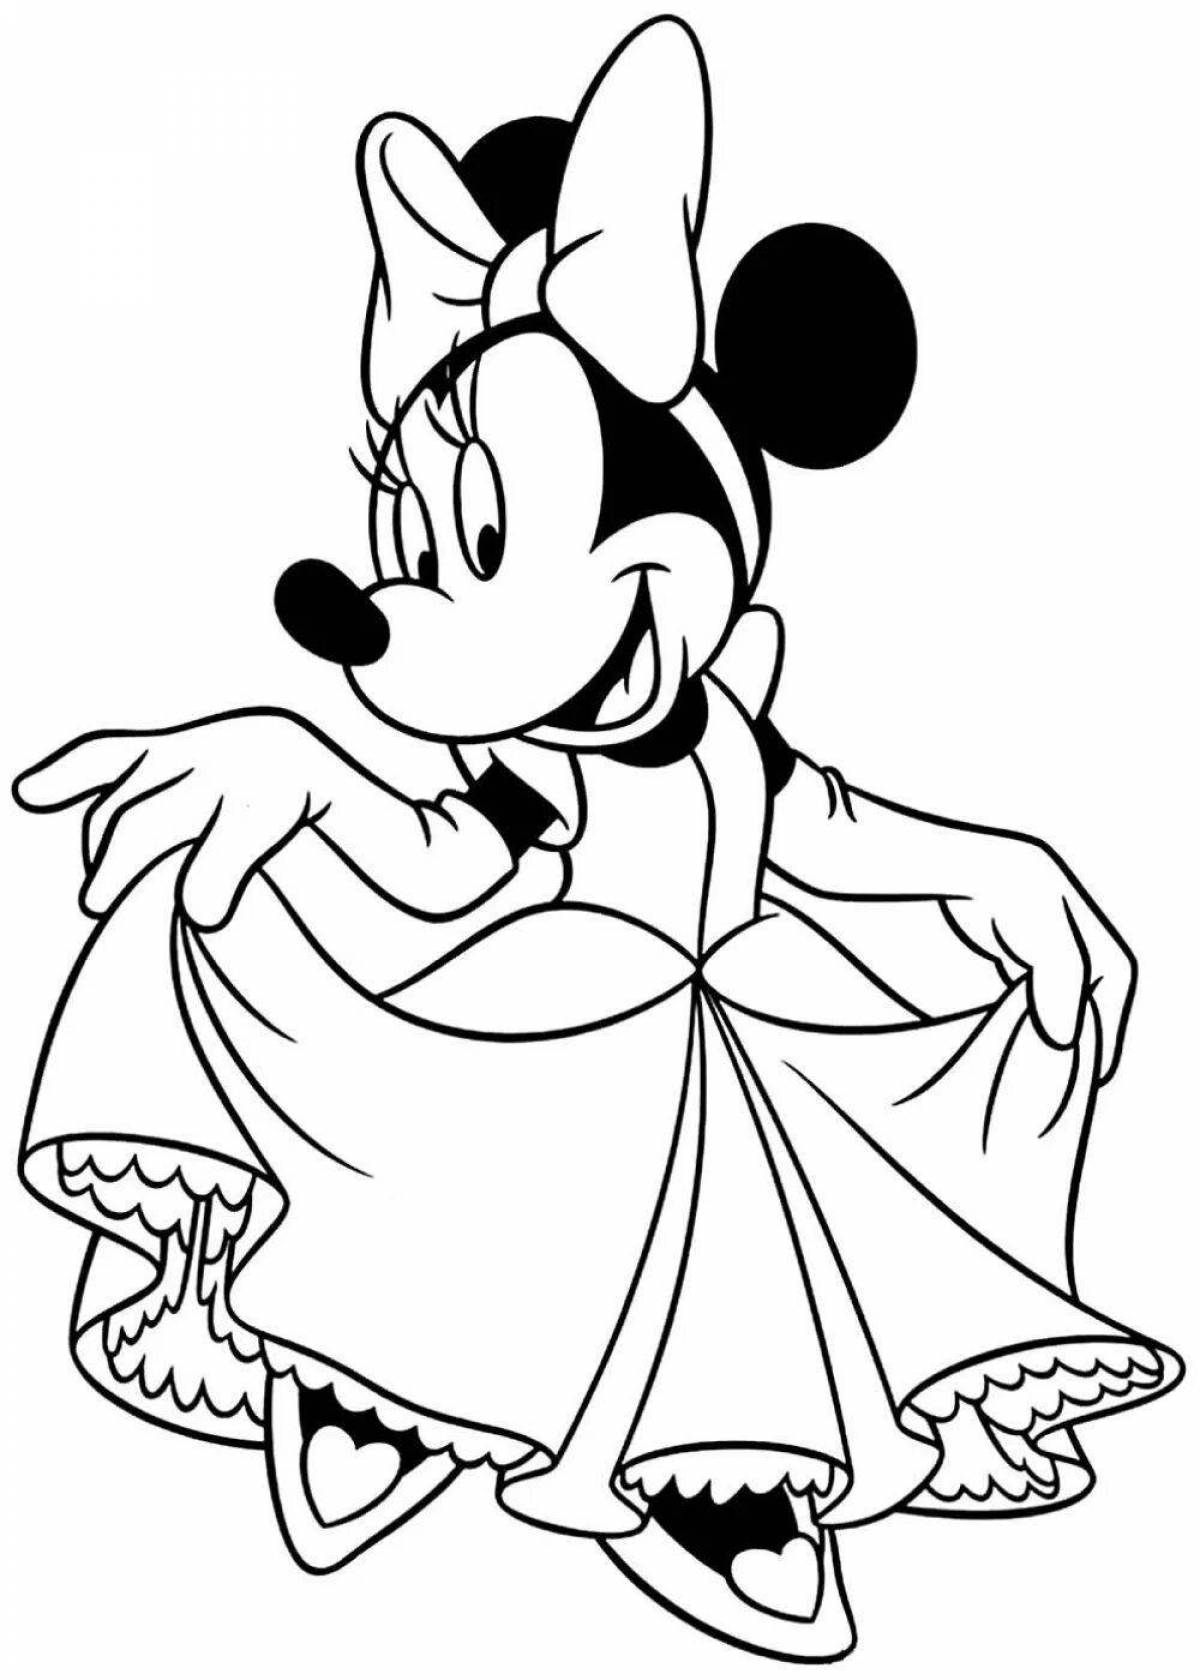 Amazing Minnie Mouse Coloring Page